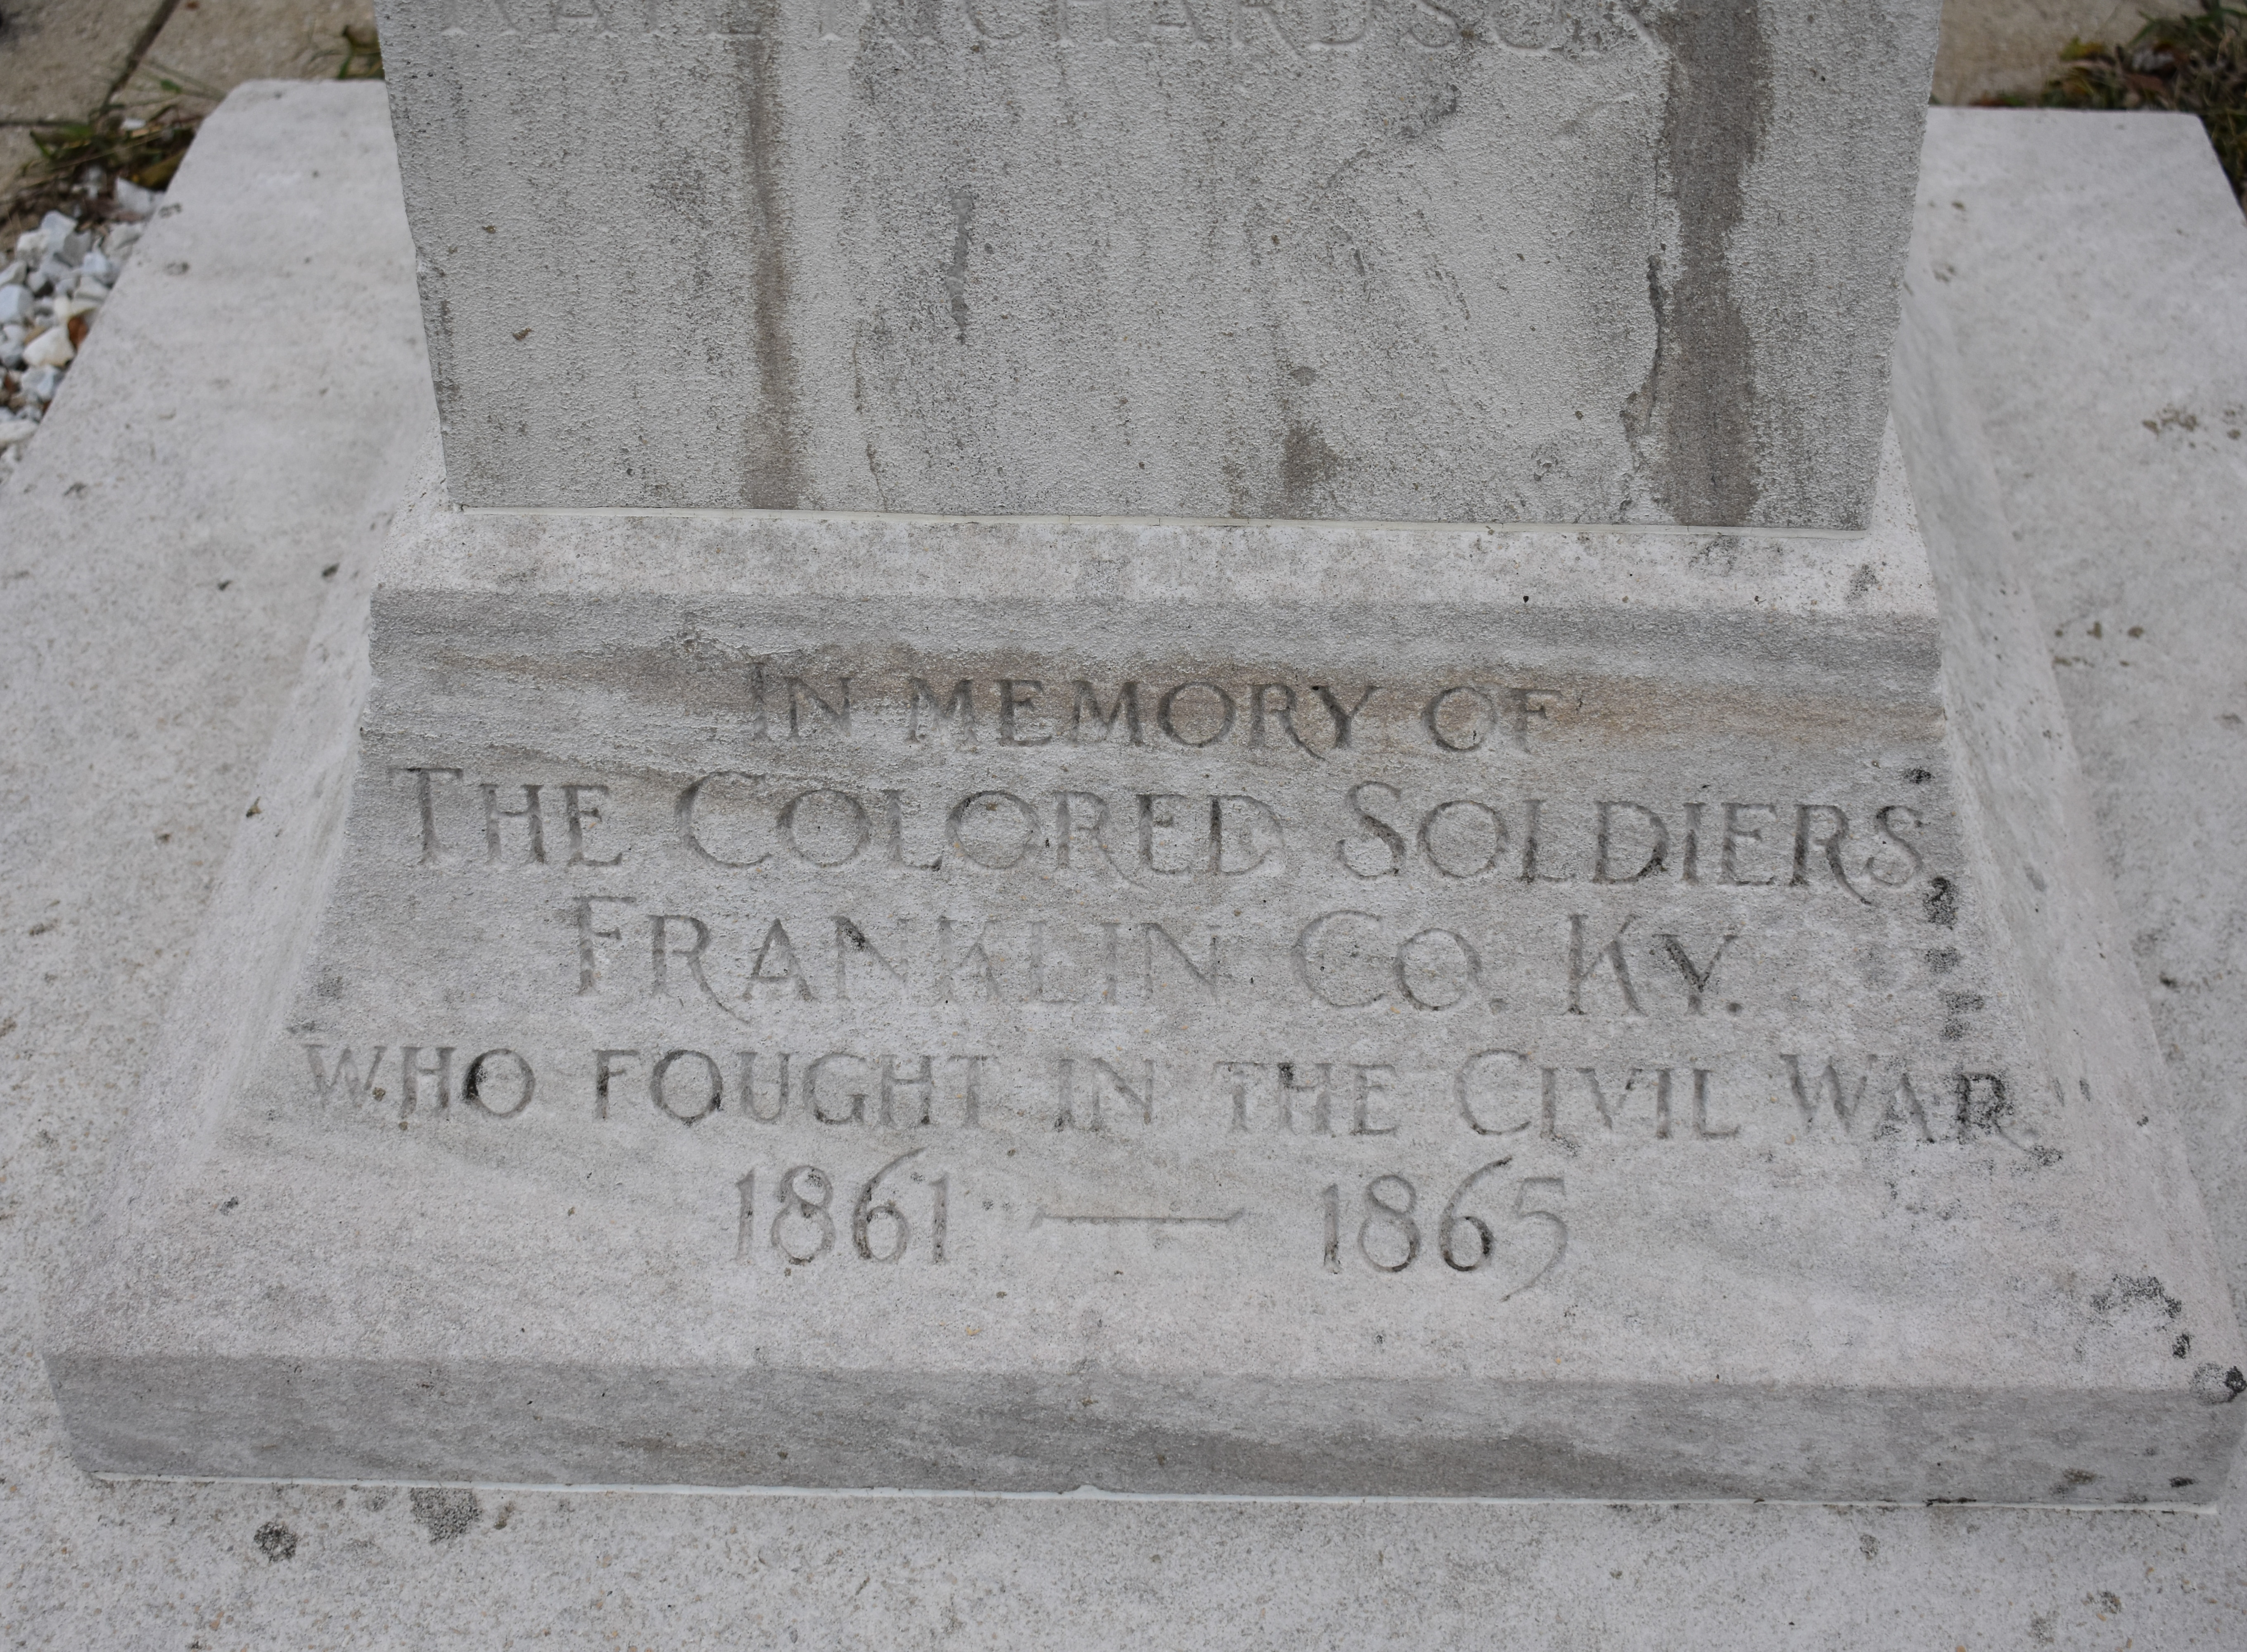 Kentucky African American Civil War Soldiers' Monument